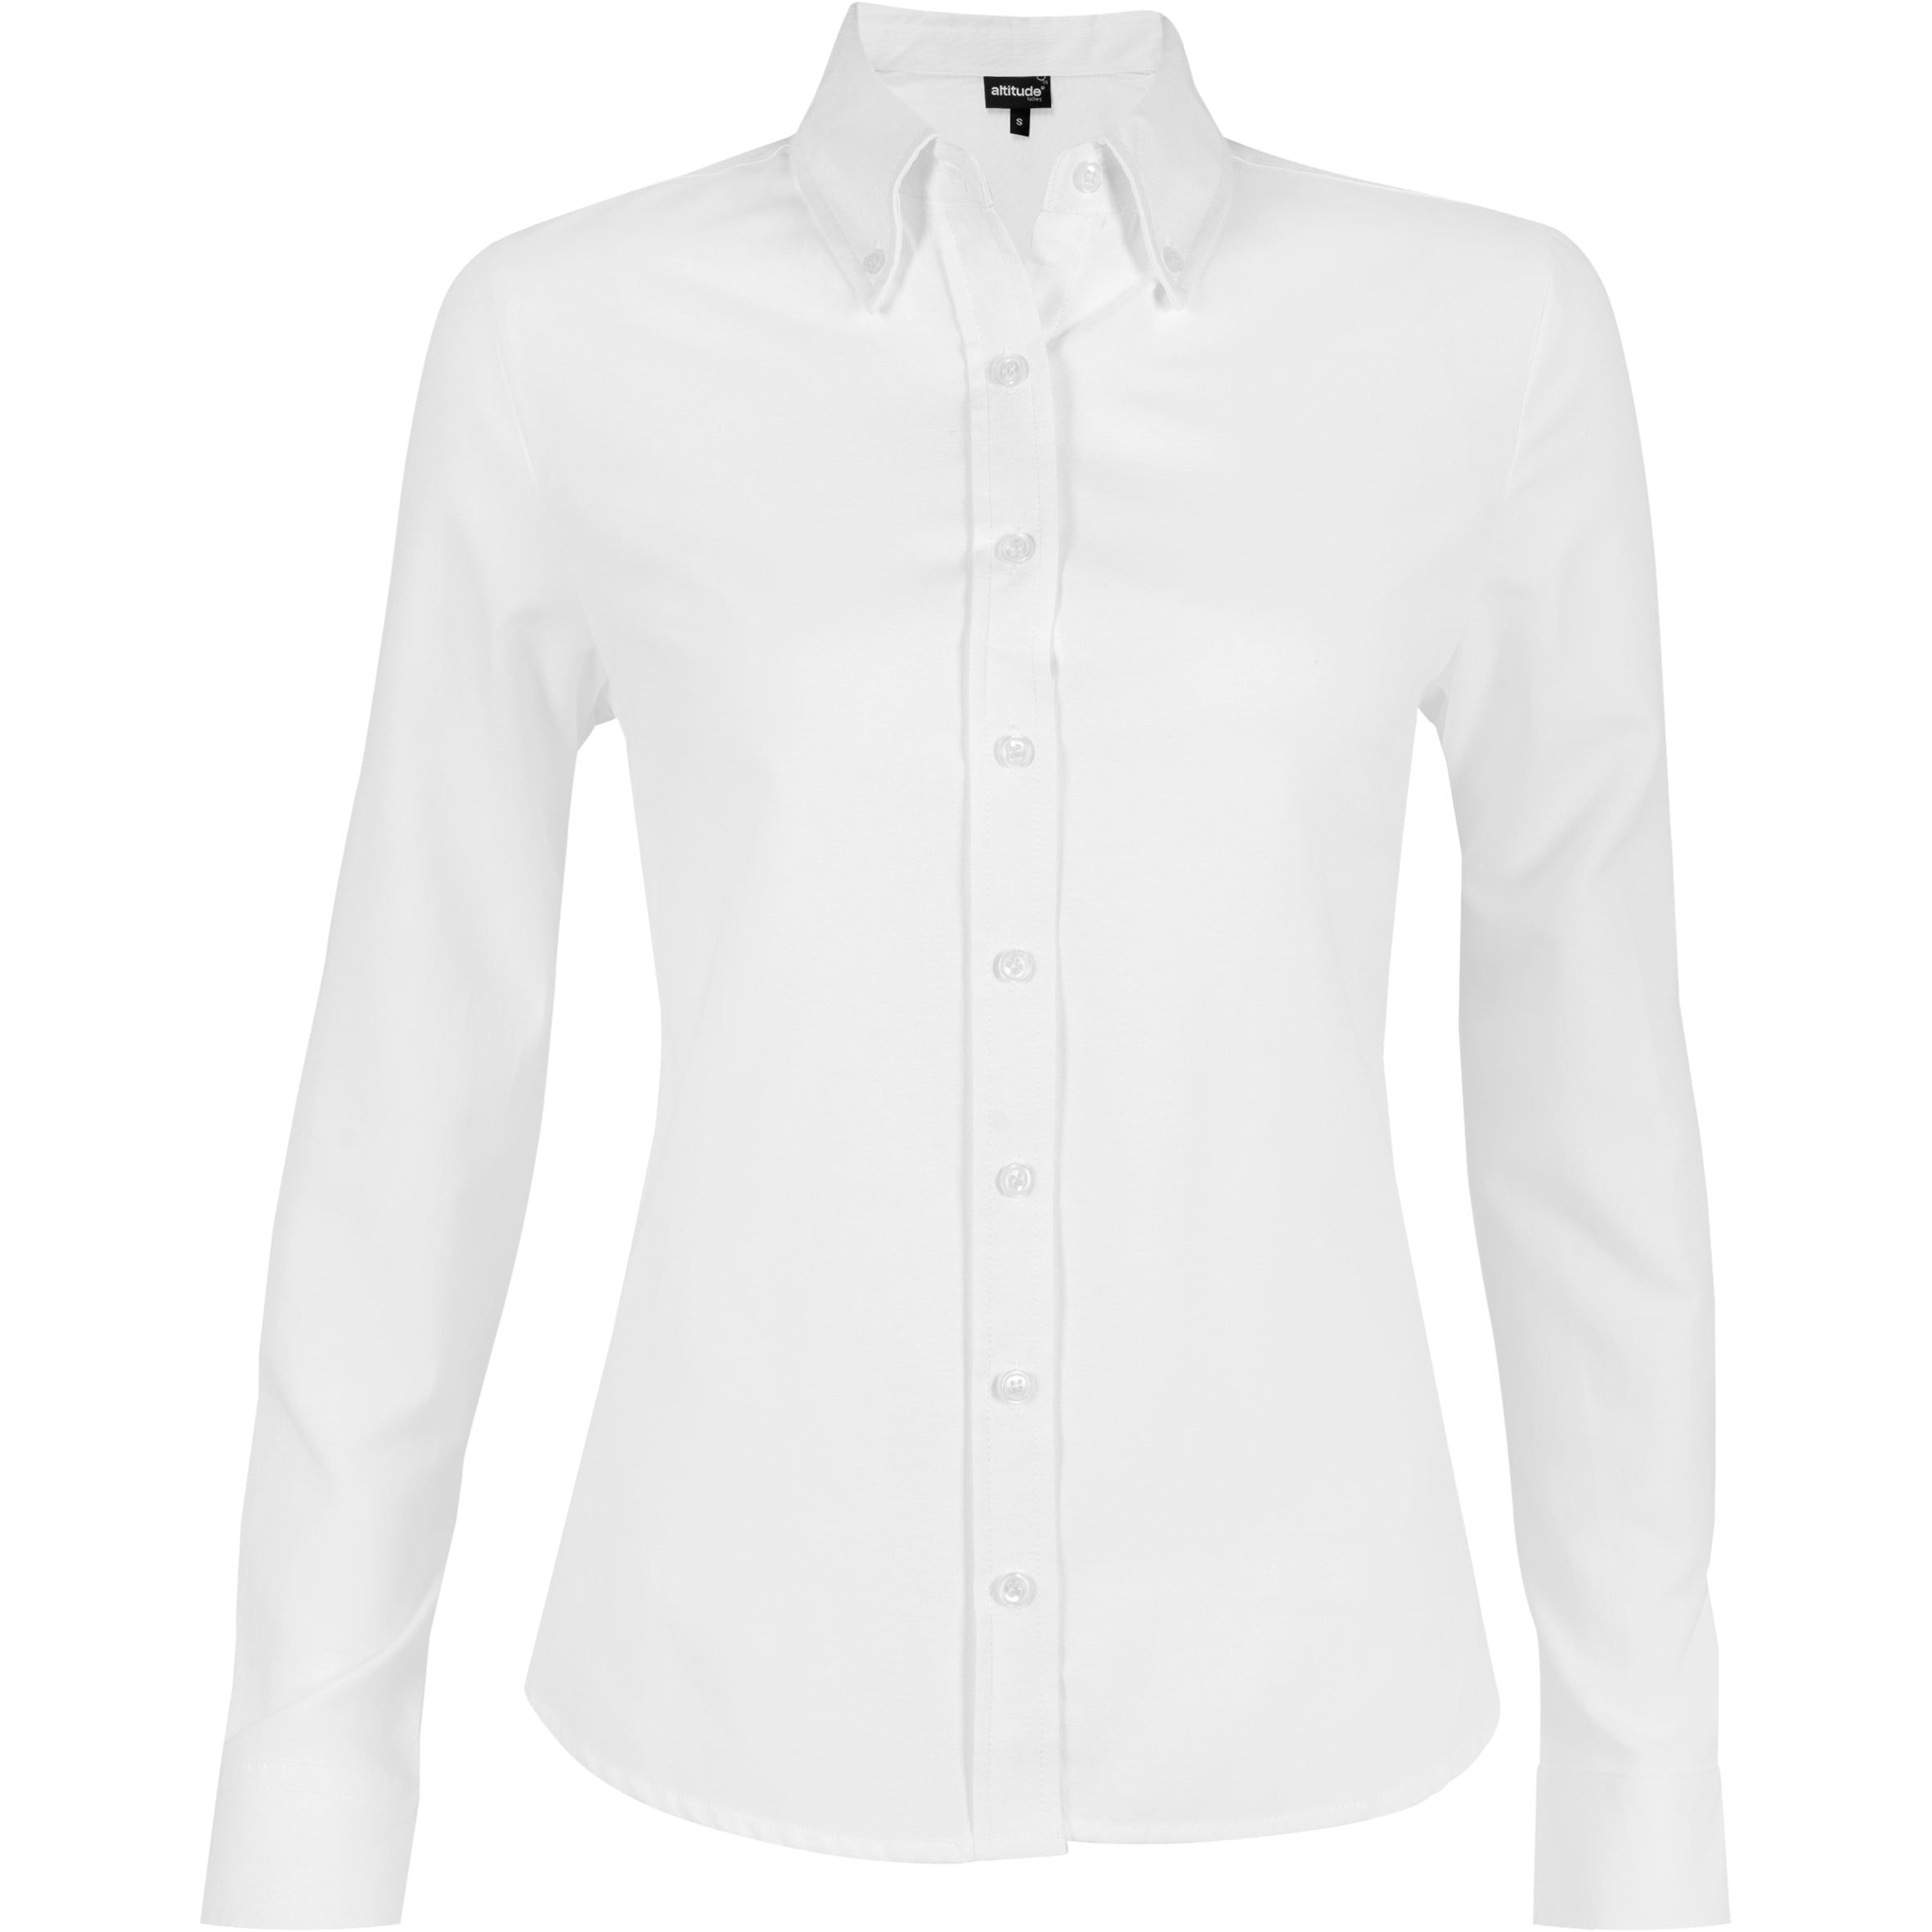 Ladies Long Sleeve Oxford Shirt - White Only-